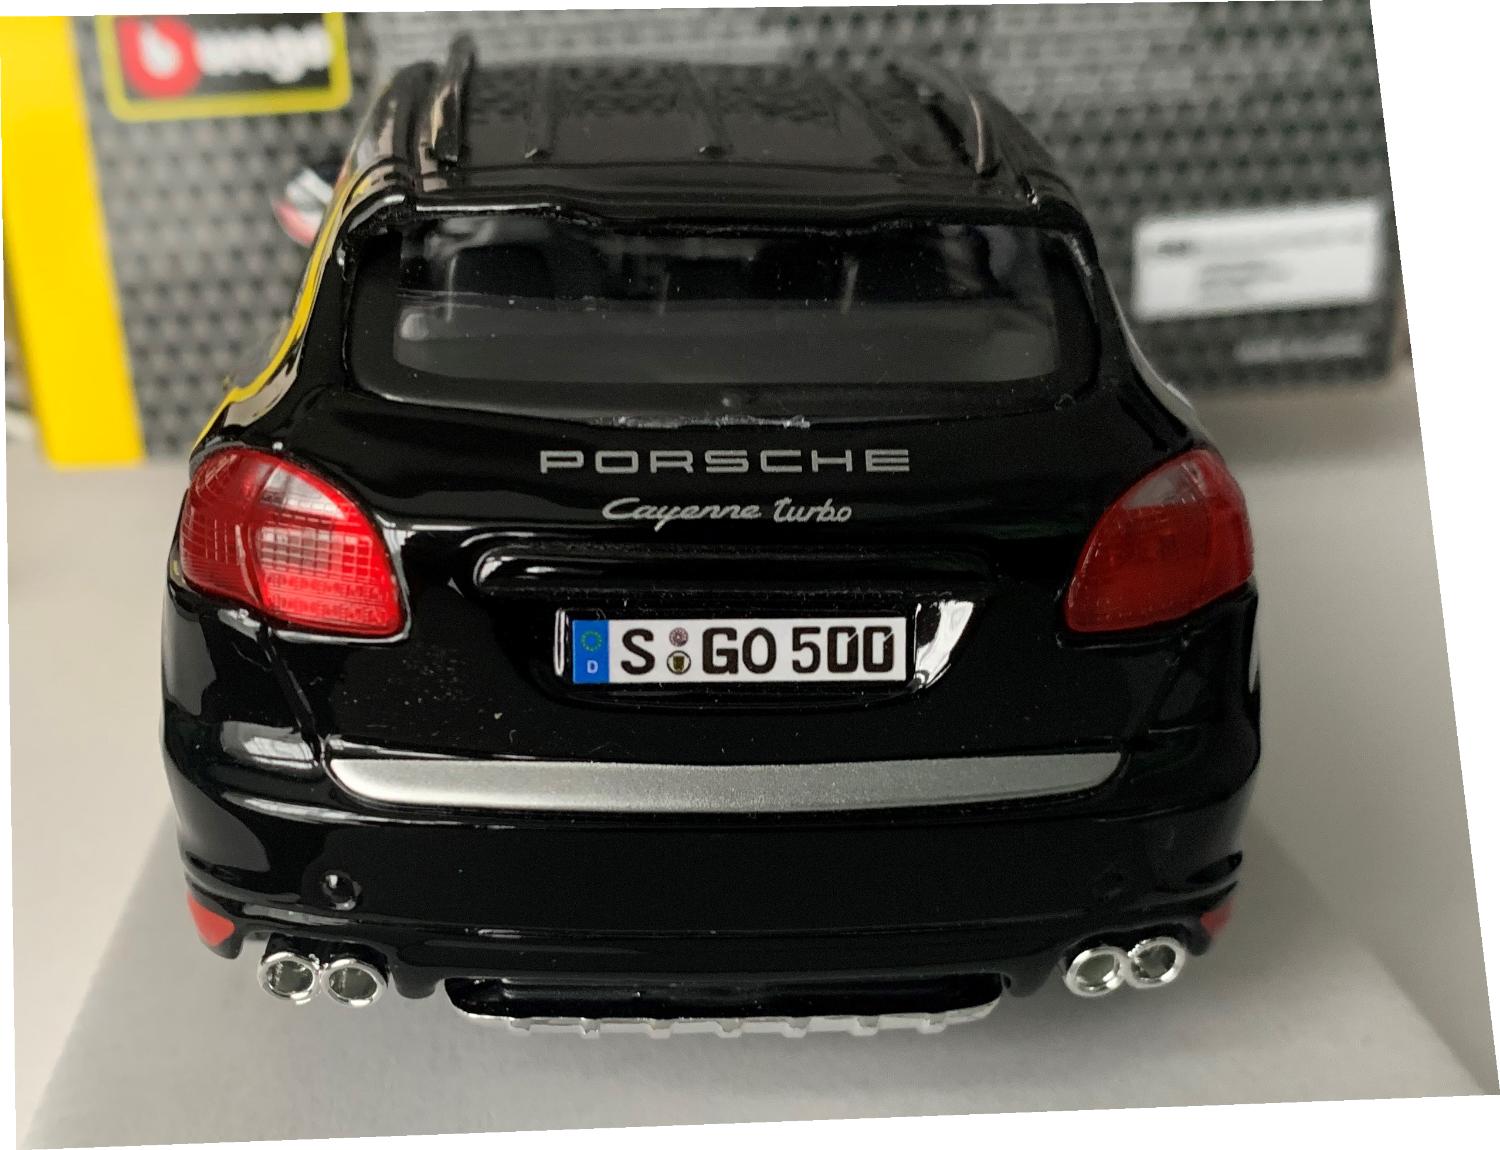 An excellent scale model of a Porsche Cayenne Turbo decorated in black with sunroof, roof rails, rear top spoiler and silver wheels.